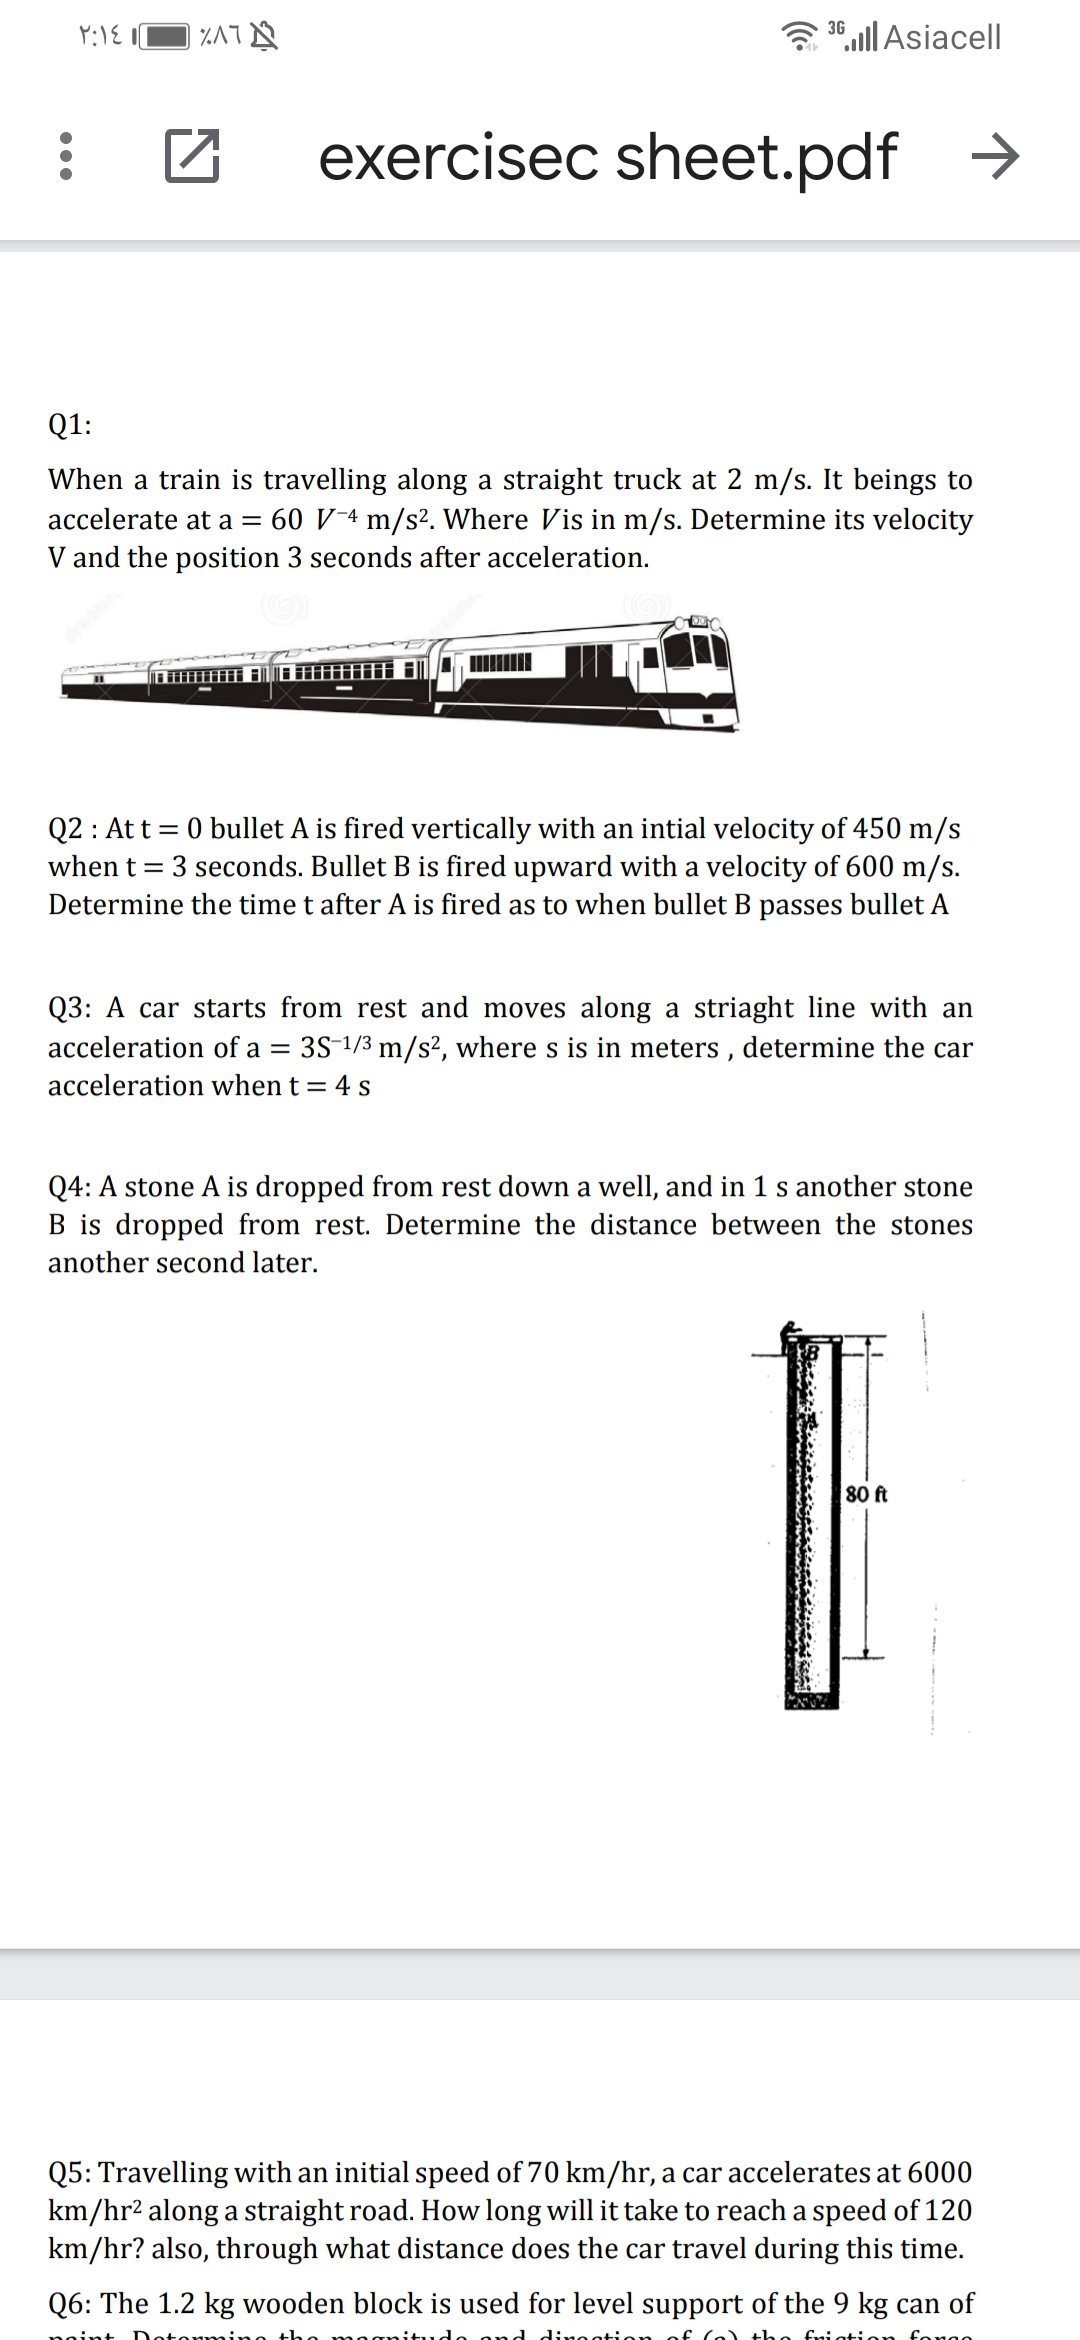 3 30,ll Asiacell|
exercisec sheet.pdf
Q1:
When a train is travelling along a straight truck at 2 m/s. It beings to
accelerate at a = 60 V¯4 m/s². Where Vis in m/s. Determine its velocity
V and the position 3 seconds after acceleration.
Q2 : At t = 0 bullet A is fired vertically with an intial velocity of 450 m/s
when t = 3 seconds. Bullet B is fired upward with a velocity of 600 m/s.
Determine the time t after A is fired as to when bullet B passes bullet A
Q3: A car starts from rest and moves along a striaght line with an
acceleration of a = 3S-1/3 m/s², where s is in meters , determine the car
acceleration when t = 4 s
Q4: A stone A is dropped from rest down a well, and in 1 s another stone
B is dropped from rest. Determine the distance between the stones
another second later.
80 ft
Q5: Travelling with an initial speed of 70 km/hr, a car accelerates at 6000
km/hr2 along a straight road. How long will it take to reach a speed of 120
km/hr? also, through what distance does the car travel during this time.
Q6: The 1.2 kg wooden block is used for level support of the 9 kg can of
noint
mino tho
dineatien
the fniation
fongo
